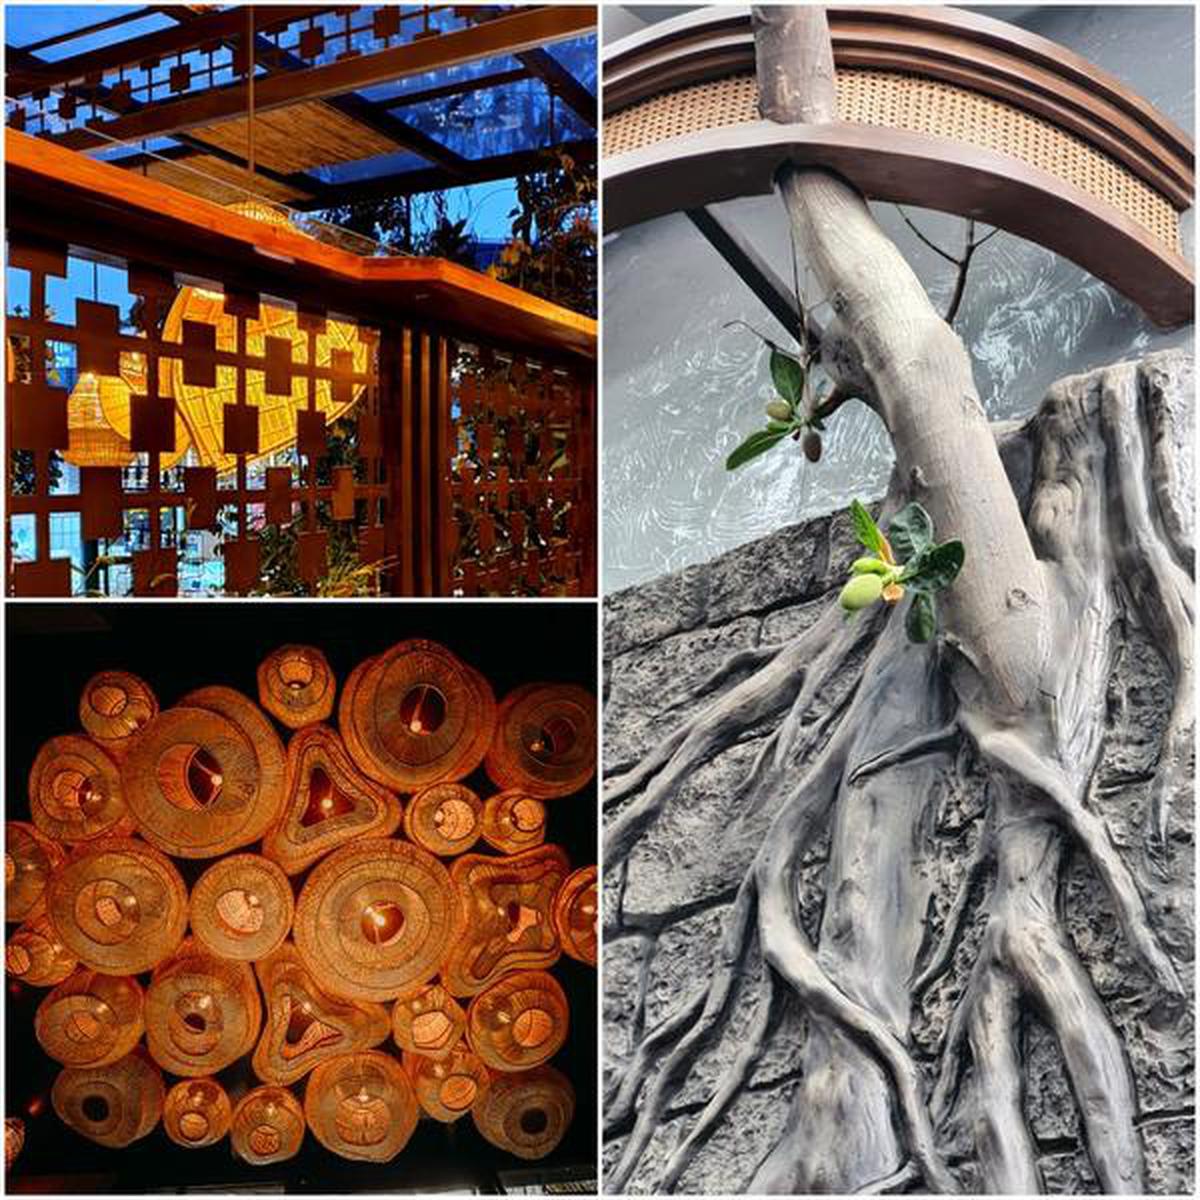 From top left: Positive and negative squares, a traditional Cambodian motif; the fruiting jackfruit tree in the Angkor bar; and the Thousand Suns light made with cane and bamboo